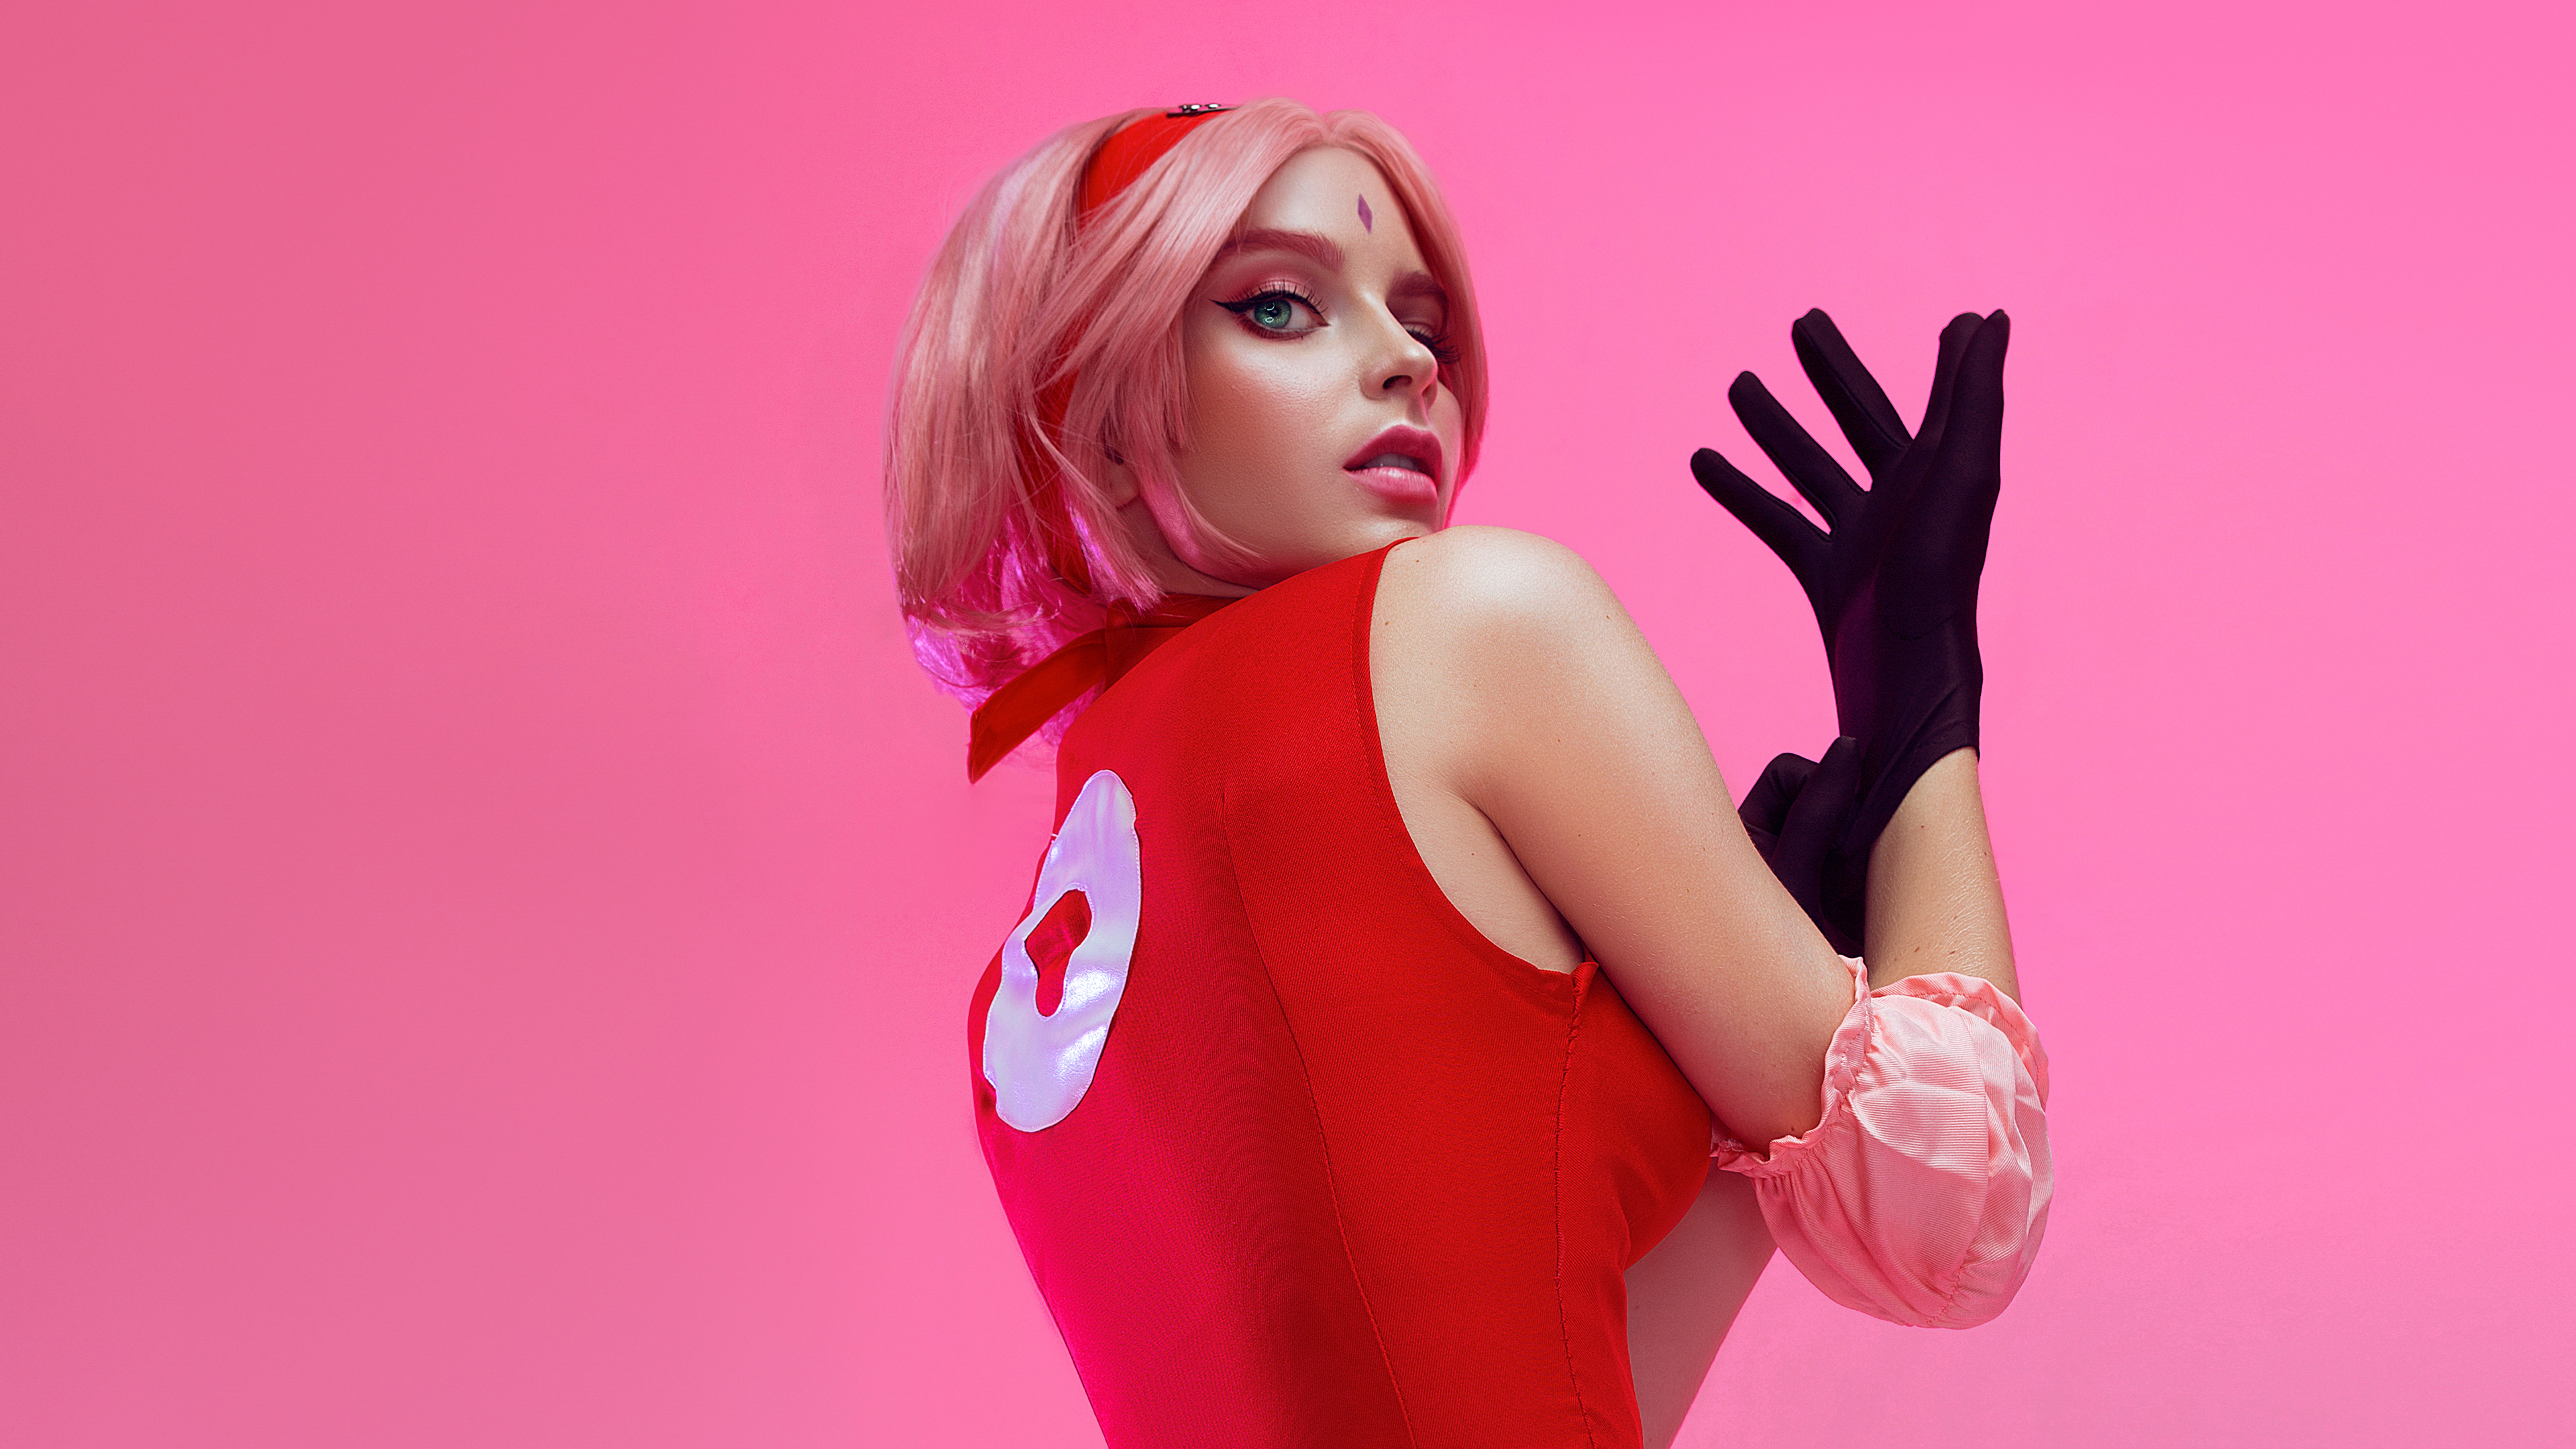 Sakura haruno cosplay k hd anime k wallpapers images backgrounds photos and pictures